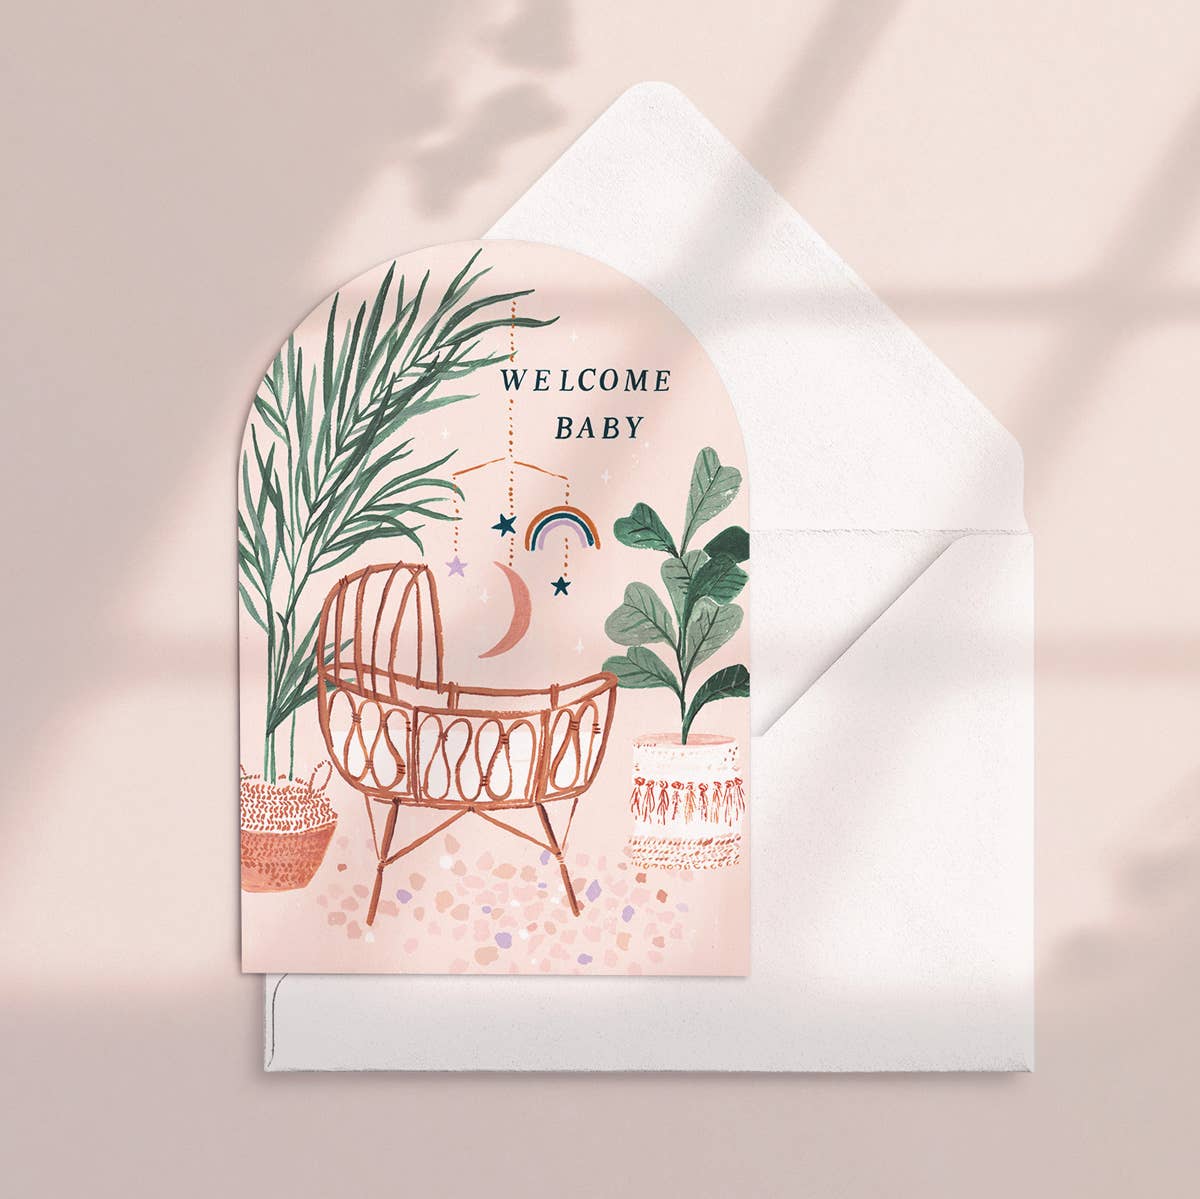 Welcome Baby Card | New Baby Card | Gender Neutral Baby Card